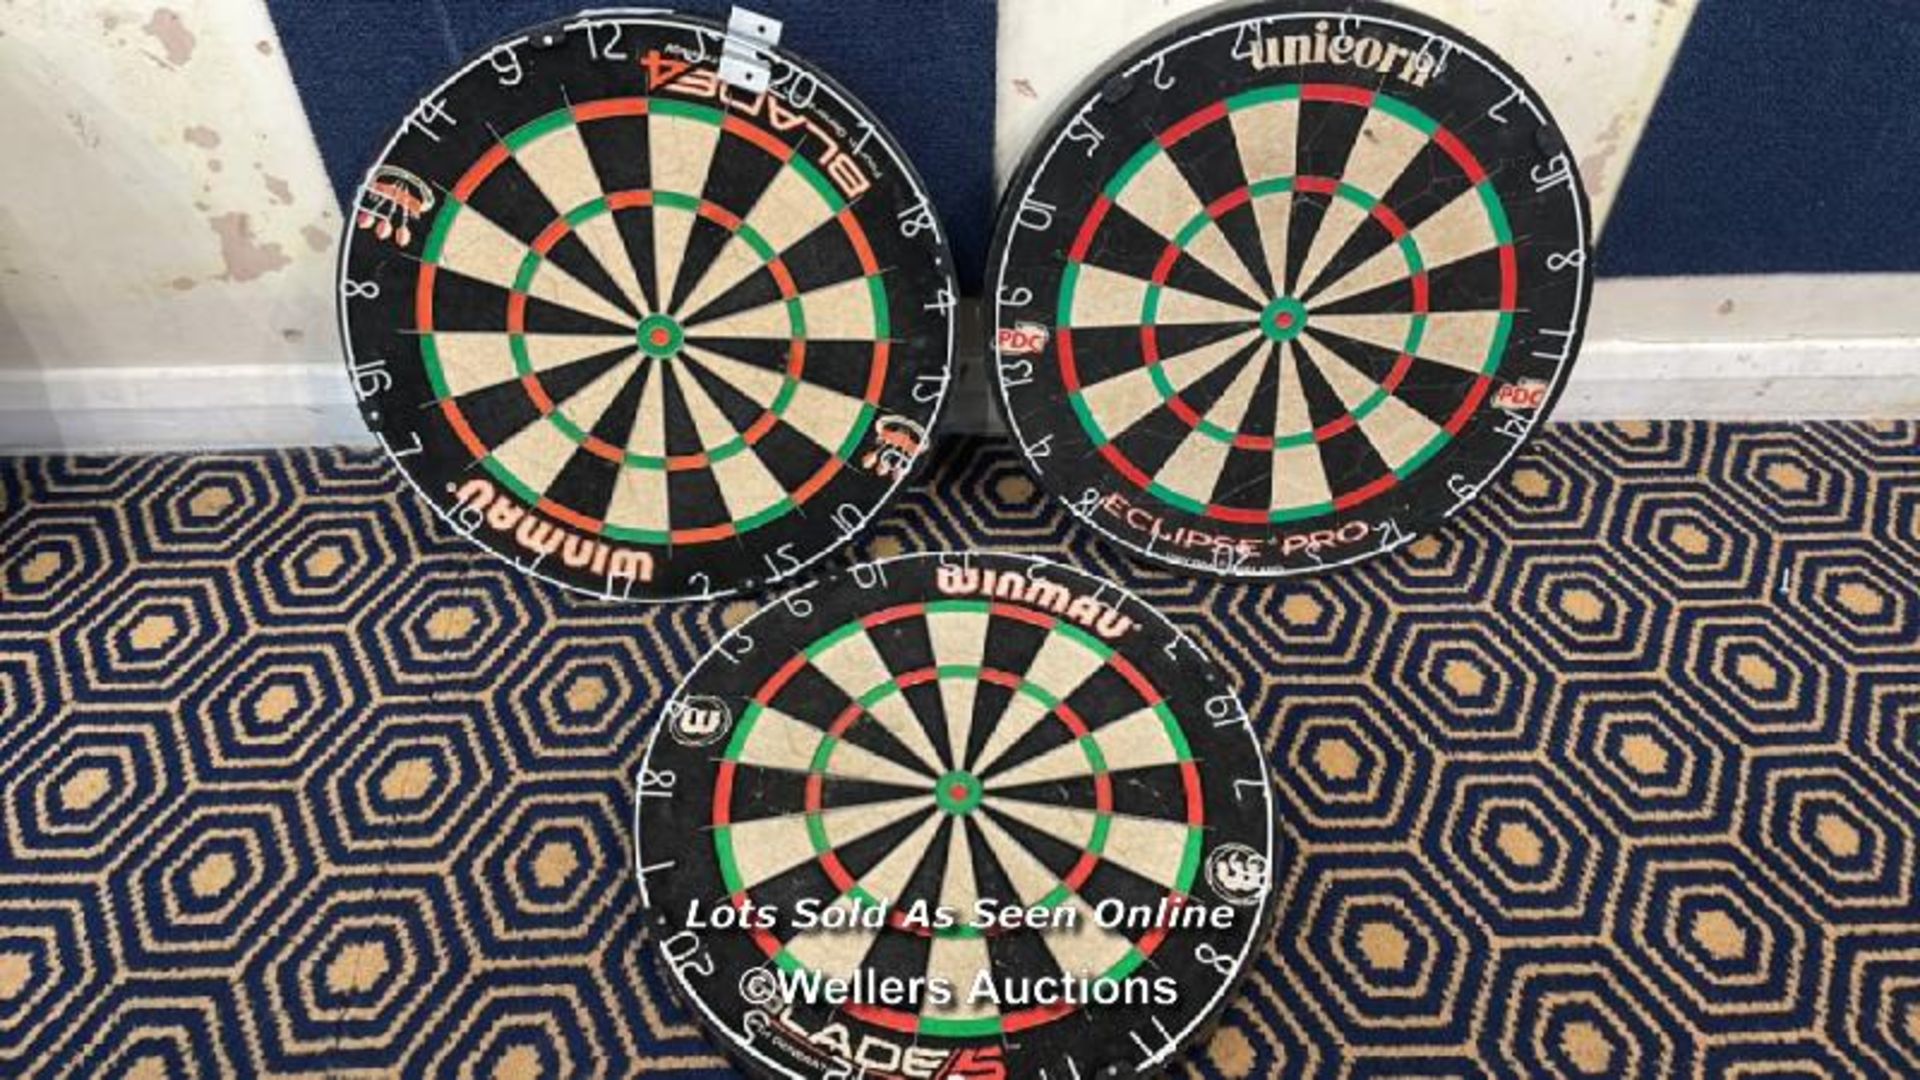 3X DARTBOARDS INCLUDING WINMAU BLADE 4/5 AND UNICORN ECLIPSE PRO, WITHOUT SURROUNDS / COLLECTION